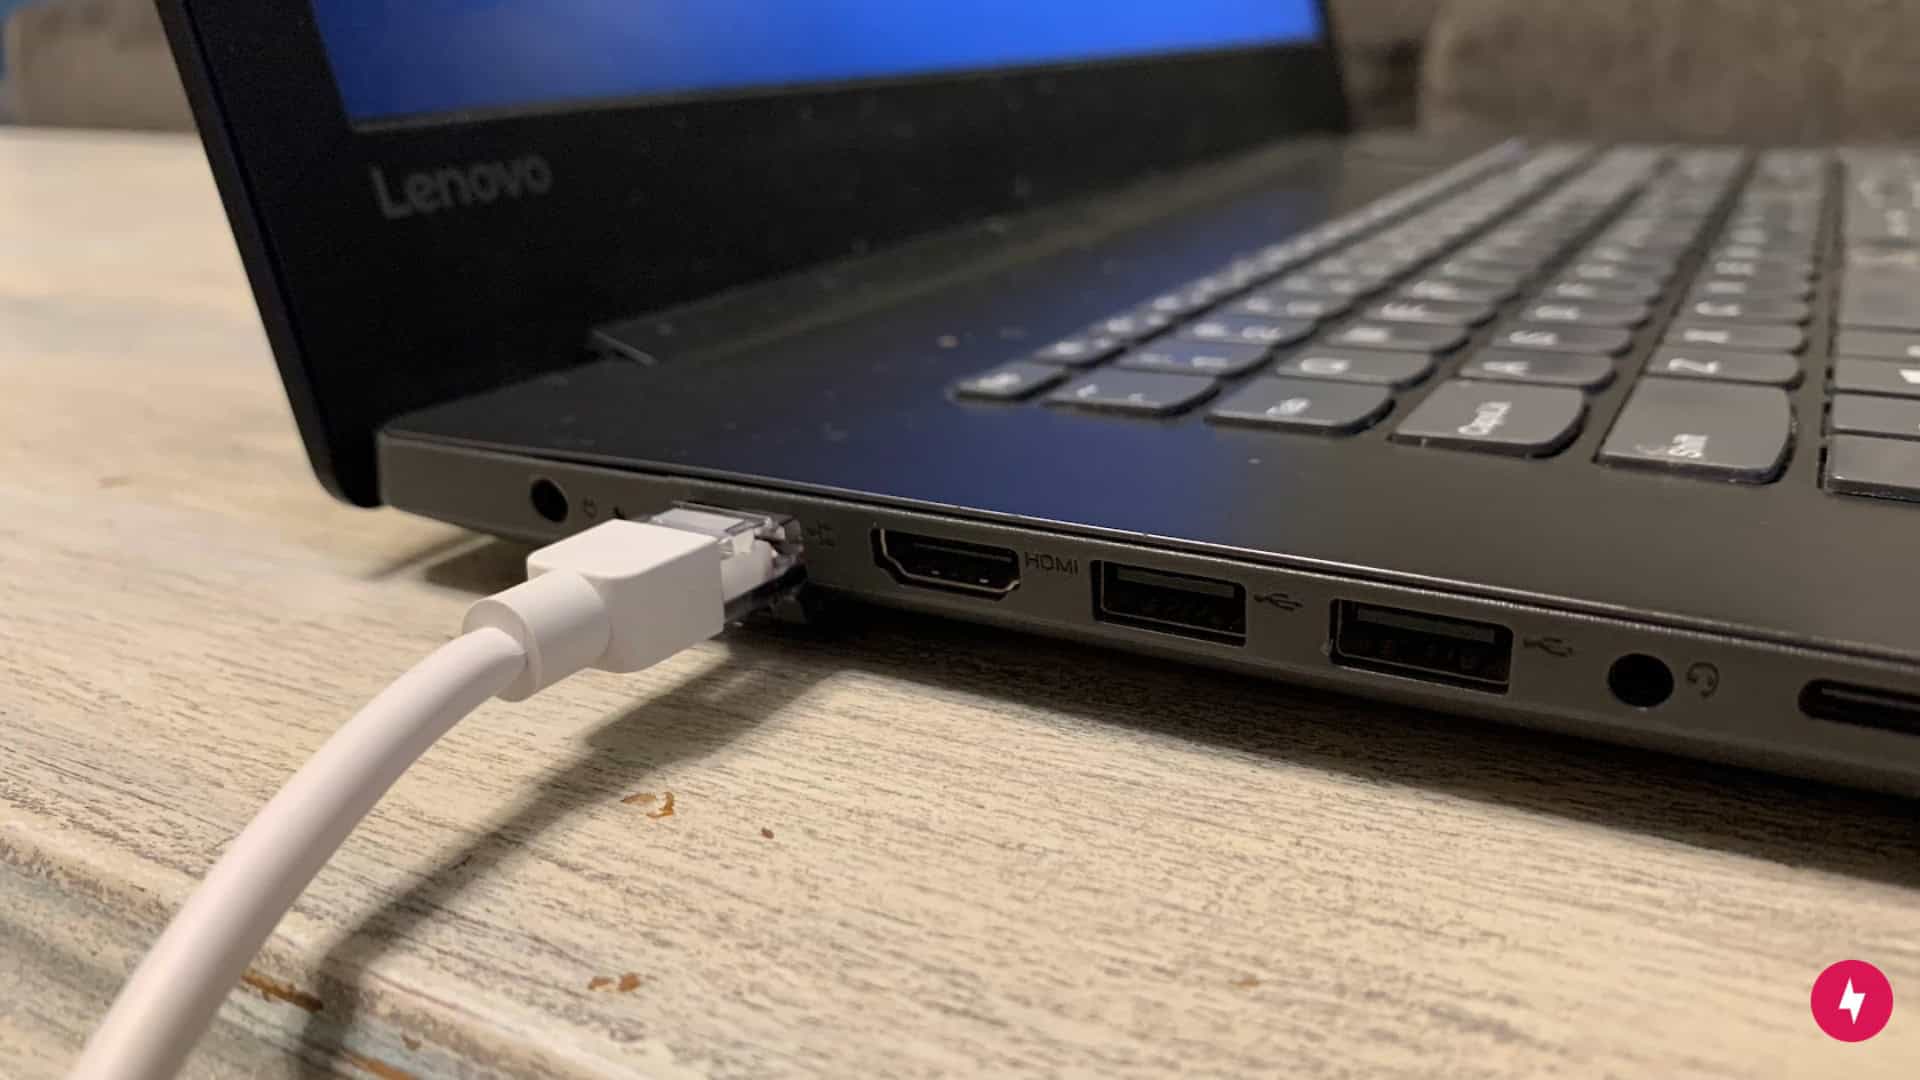 An Ethernet cord connected to a black Windows laptop.